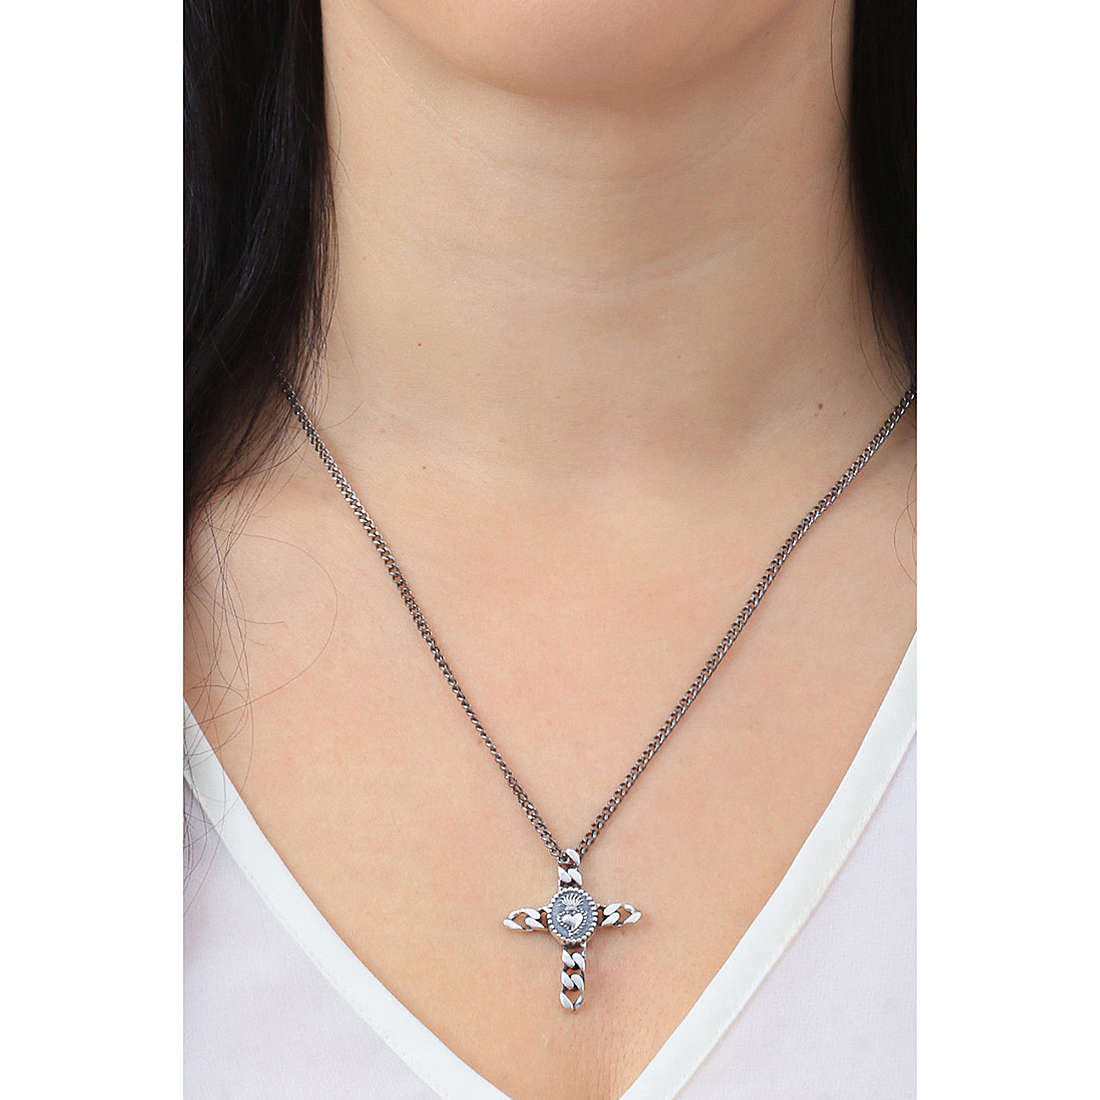 Amen necklaces Hipster woman CLGRSC wearing